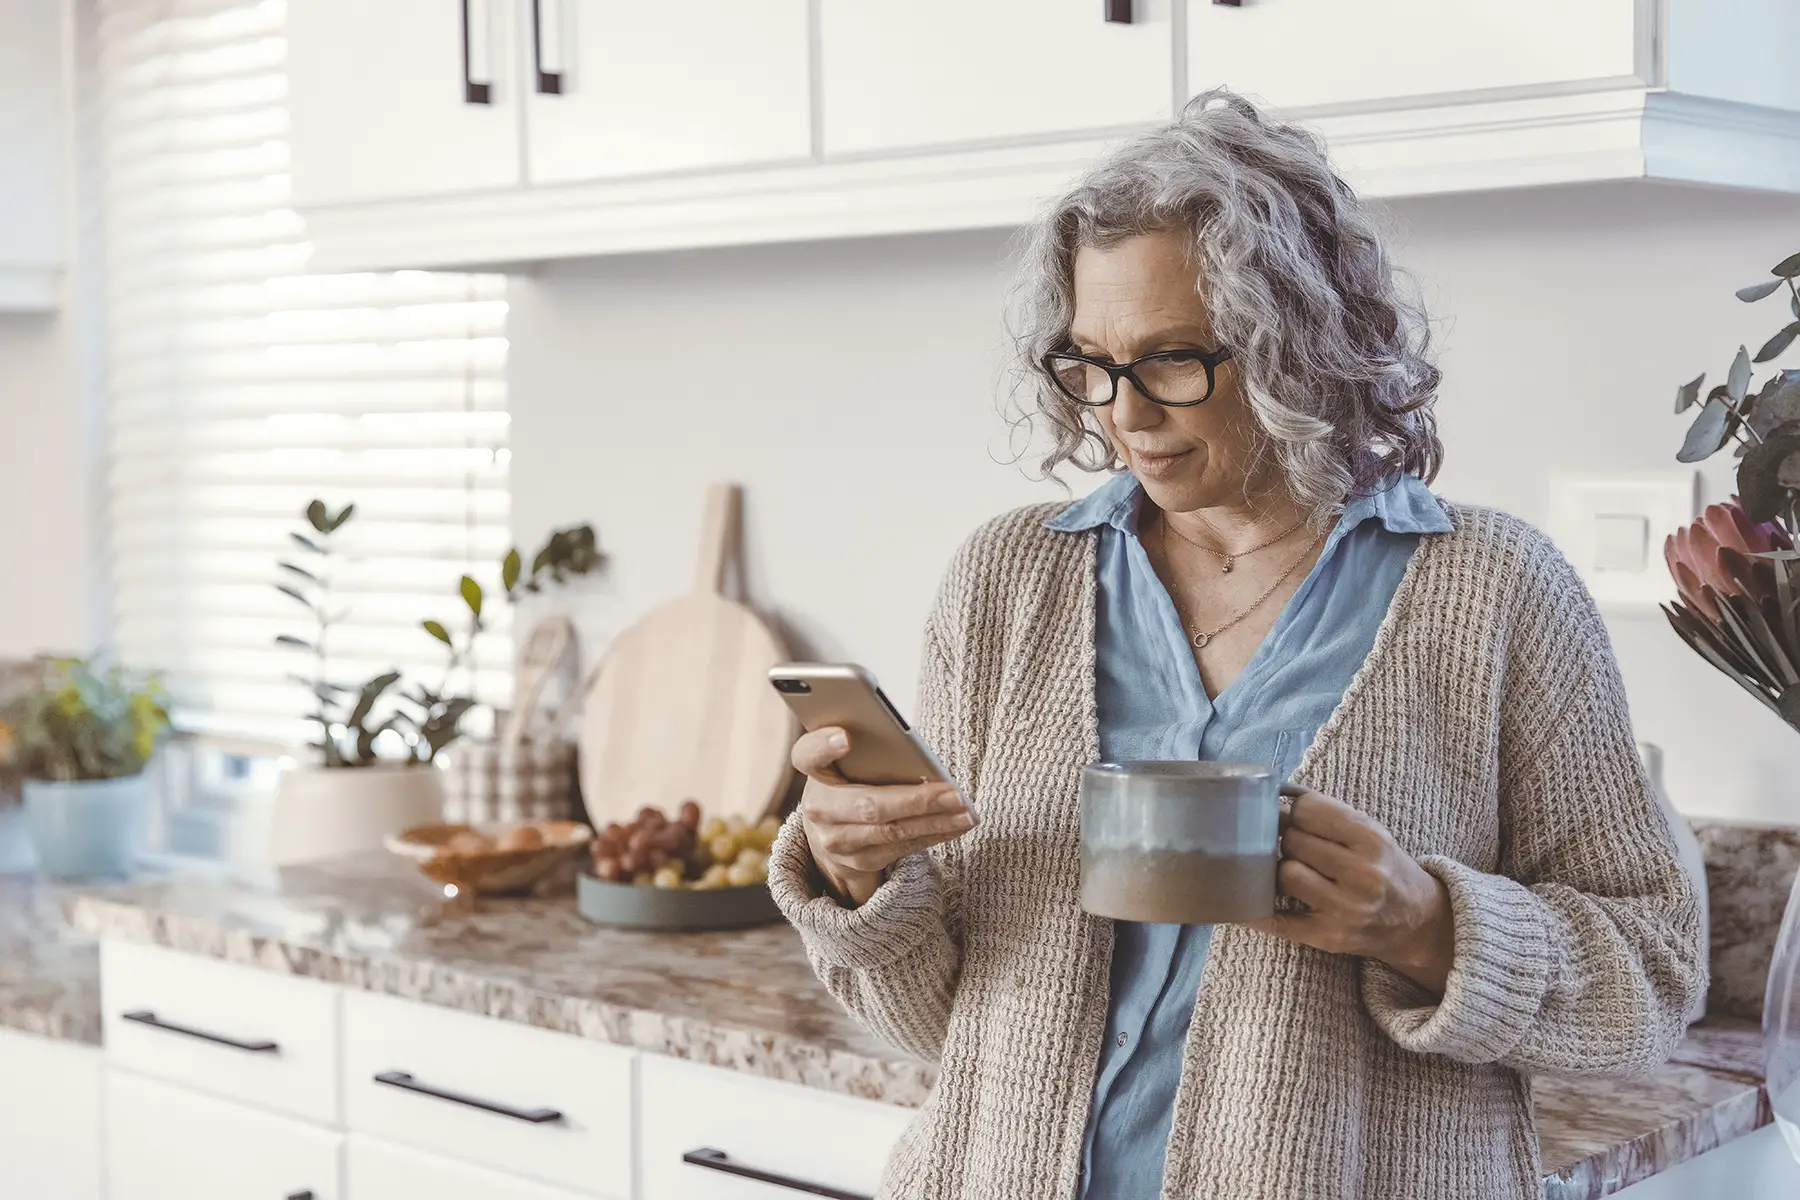 A woman looks at her phone, with a cup in her hand, while standing in her bright kitchen